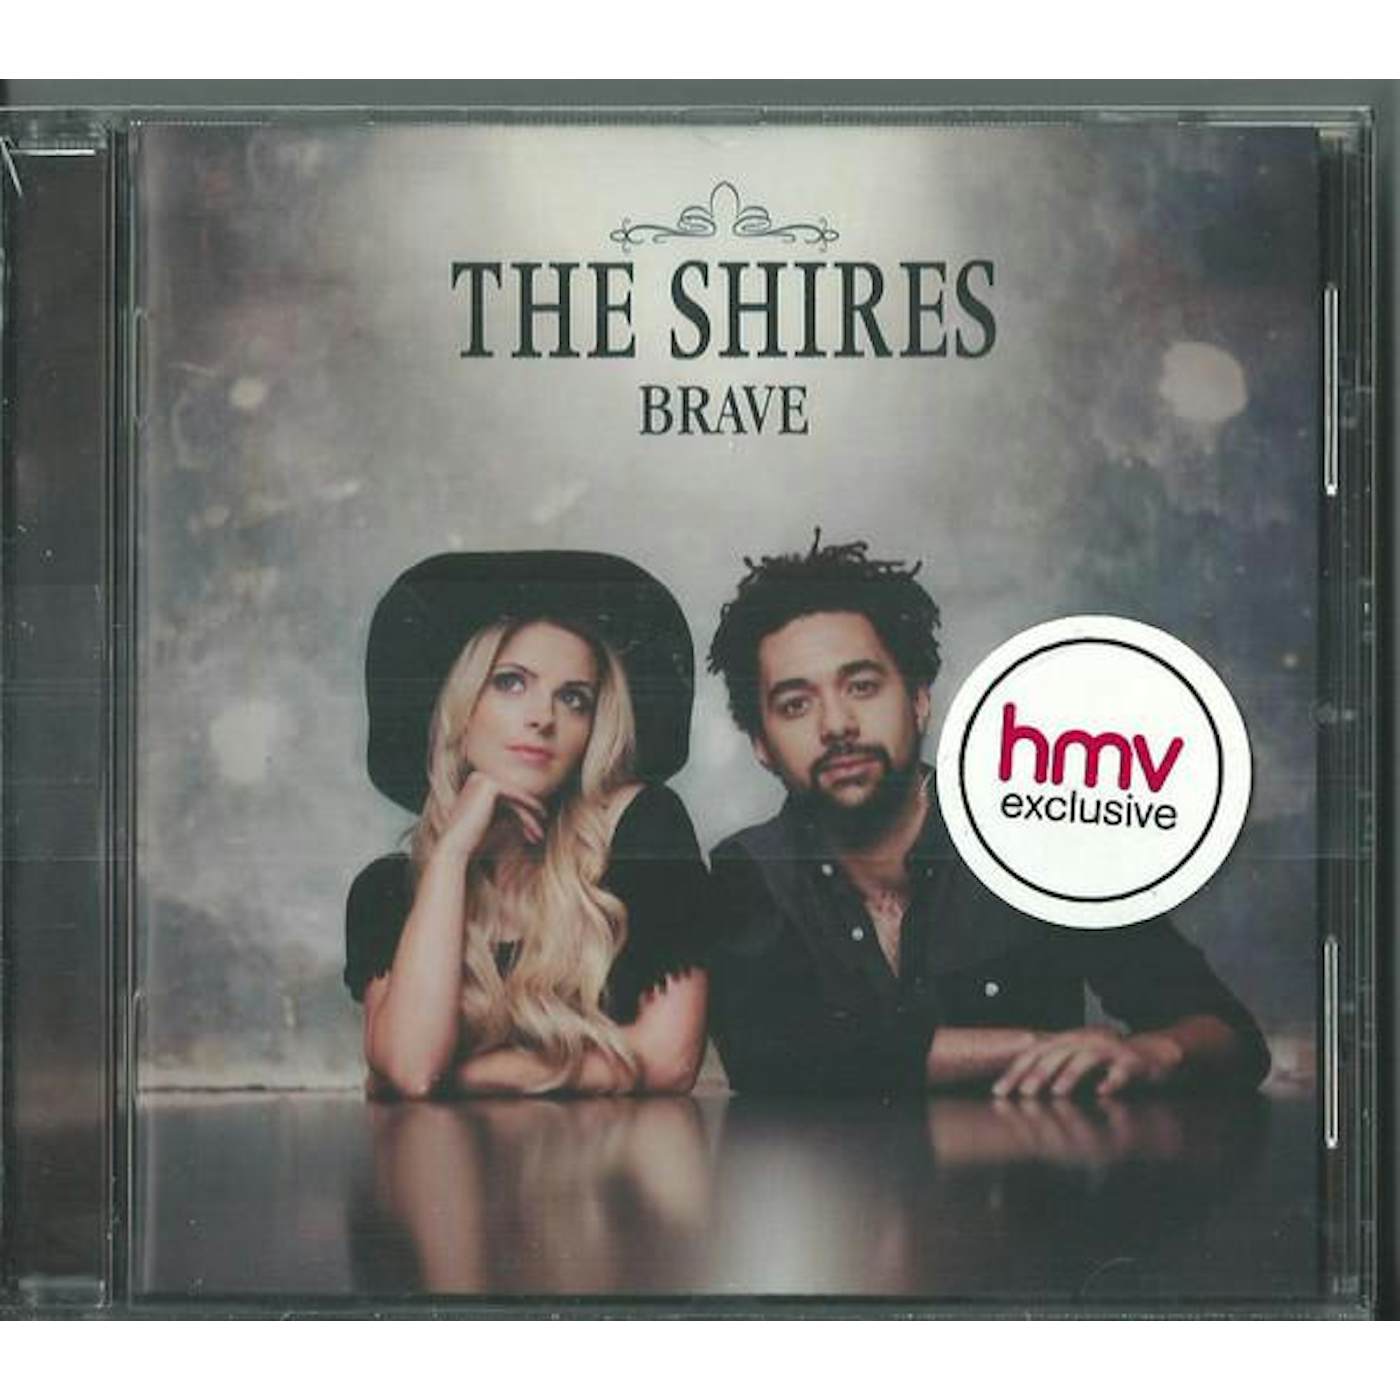 The Shires CD